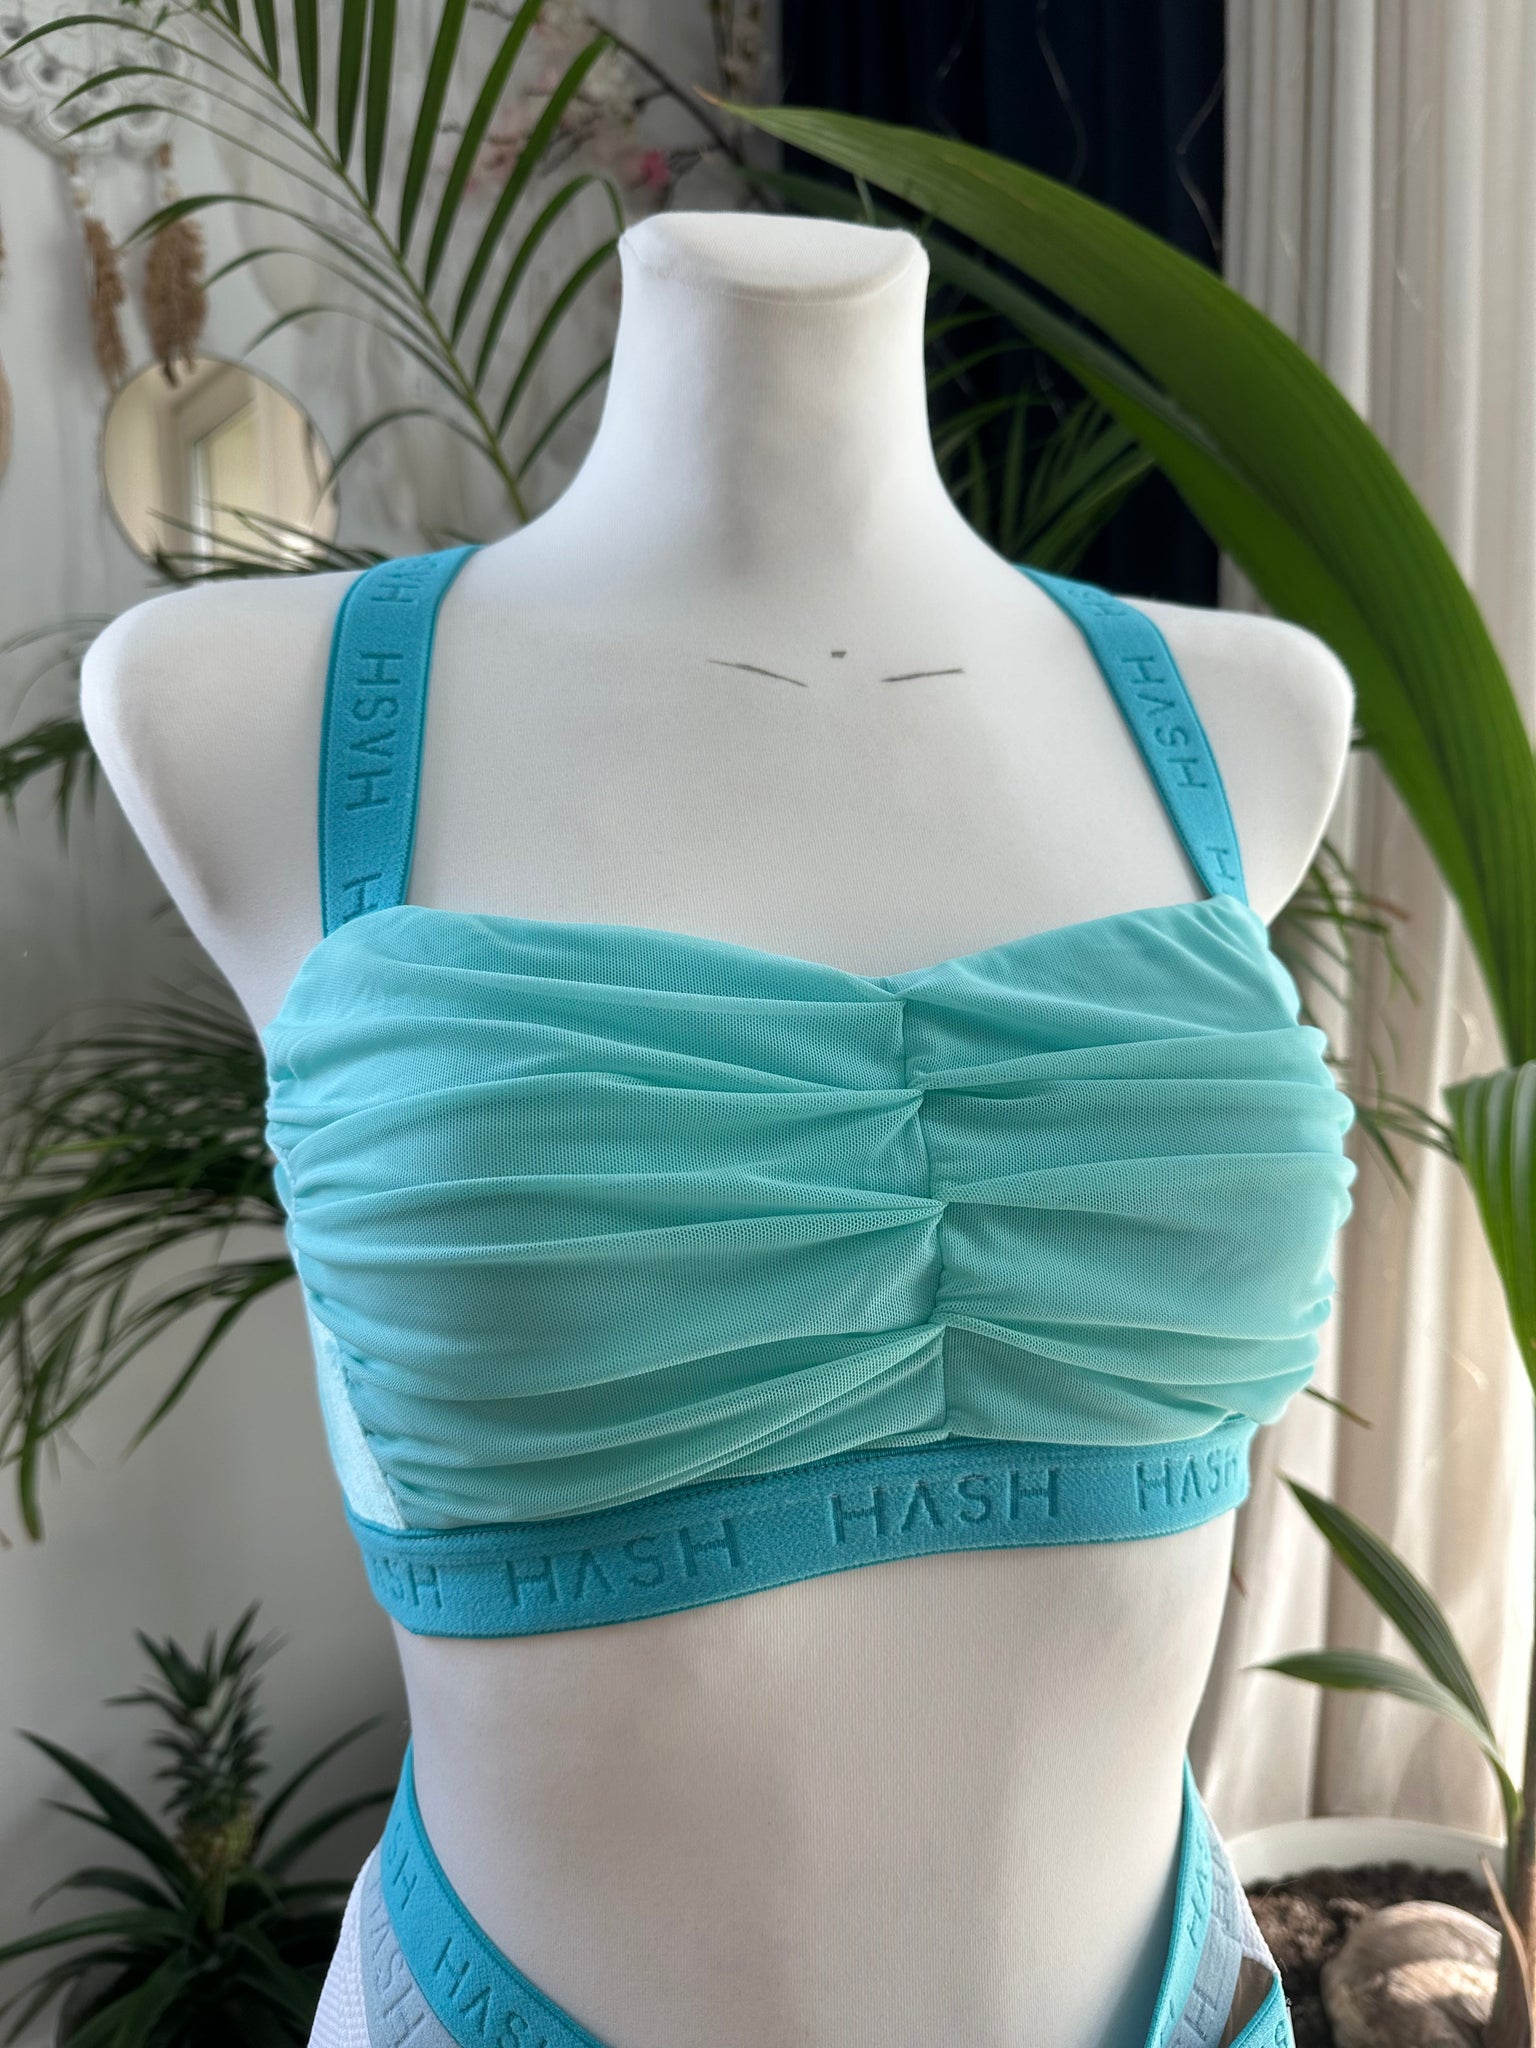 TOP MERMAID JELLY BELLY SKY BLUE MESH OUTLET